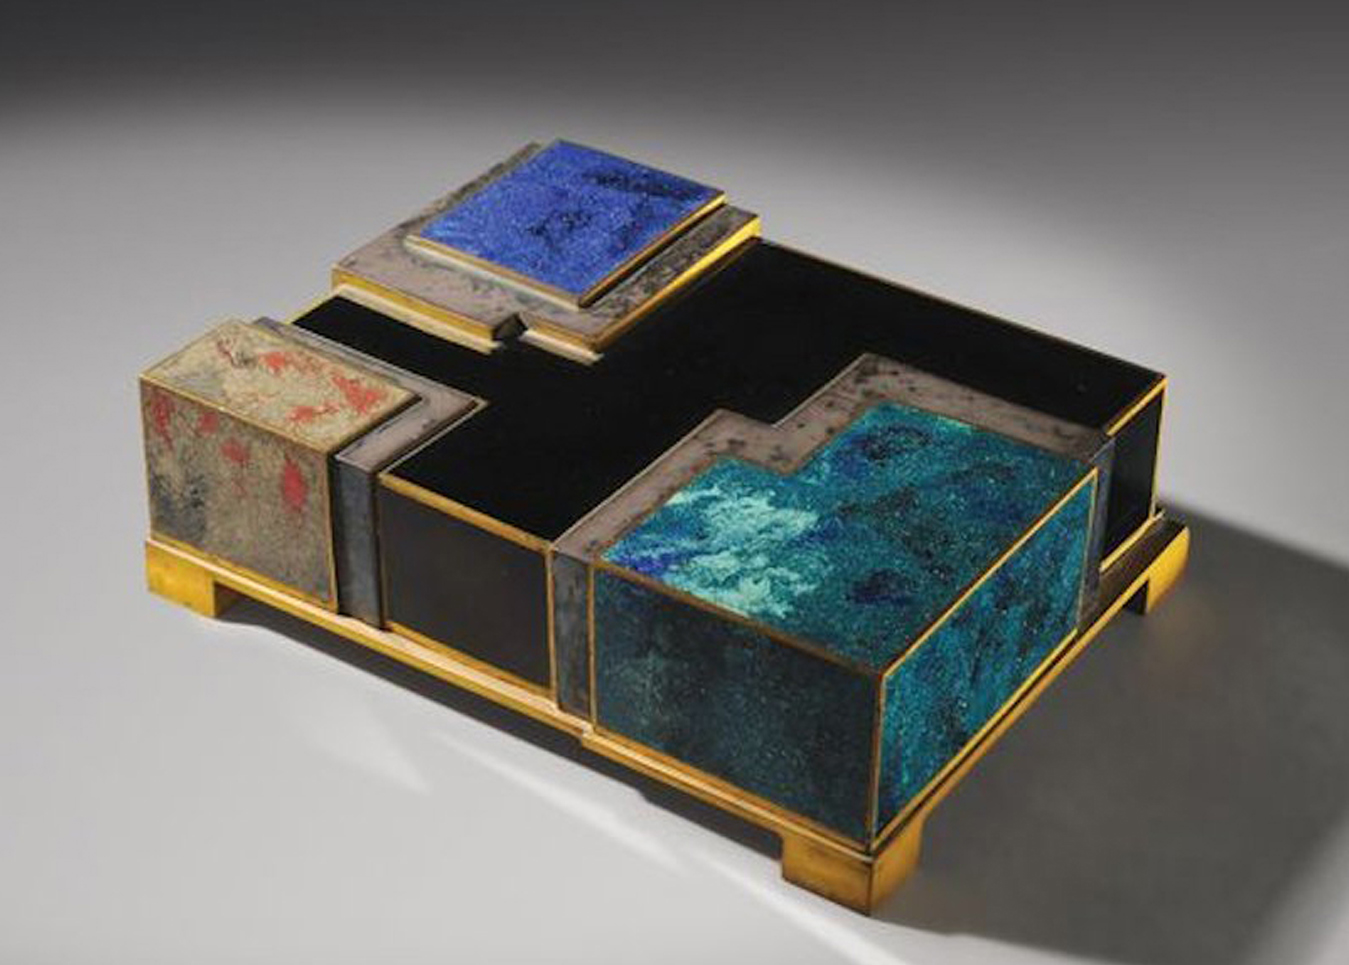 Enamel and Lacquer box by Jean Dunand and Jean Goulden one of designer Alexander Lamont's favorite Art Deco pieces